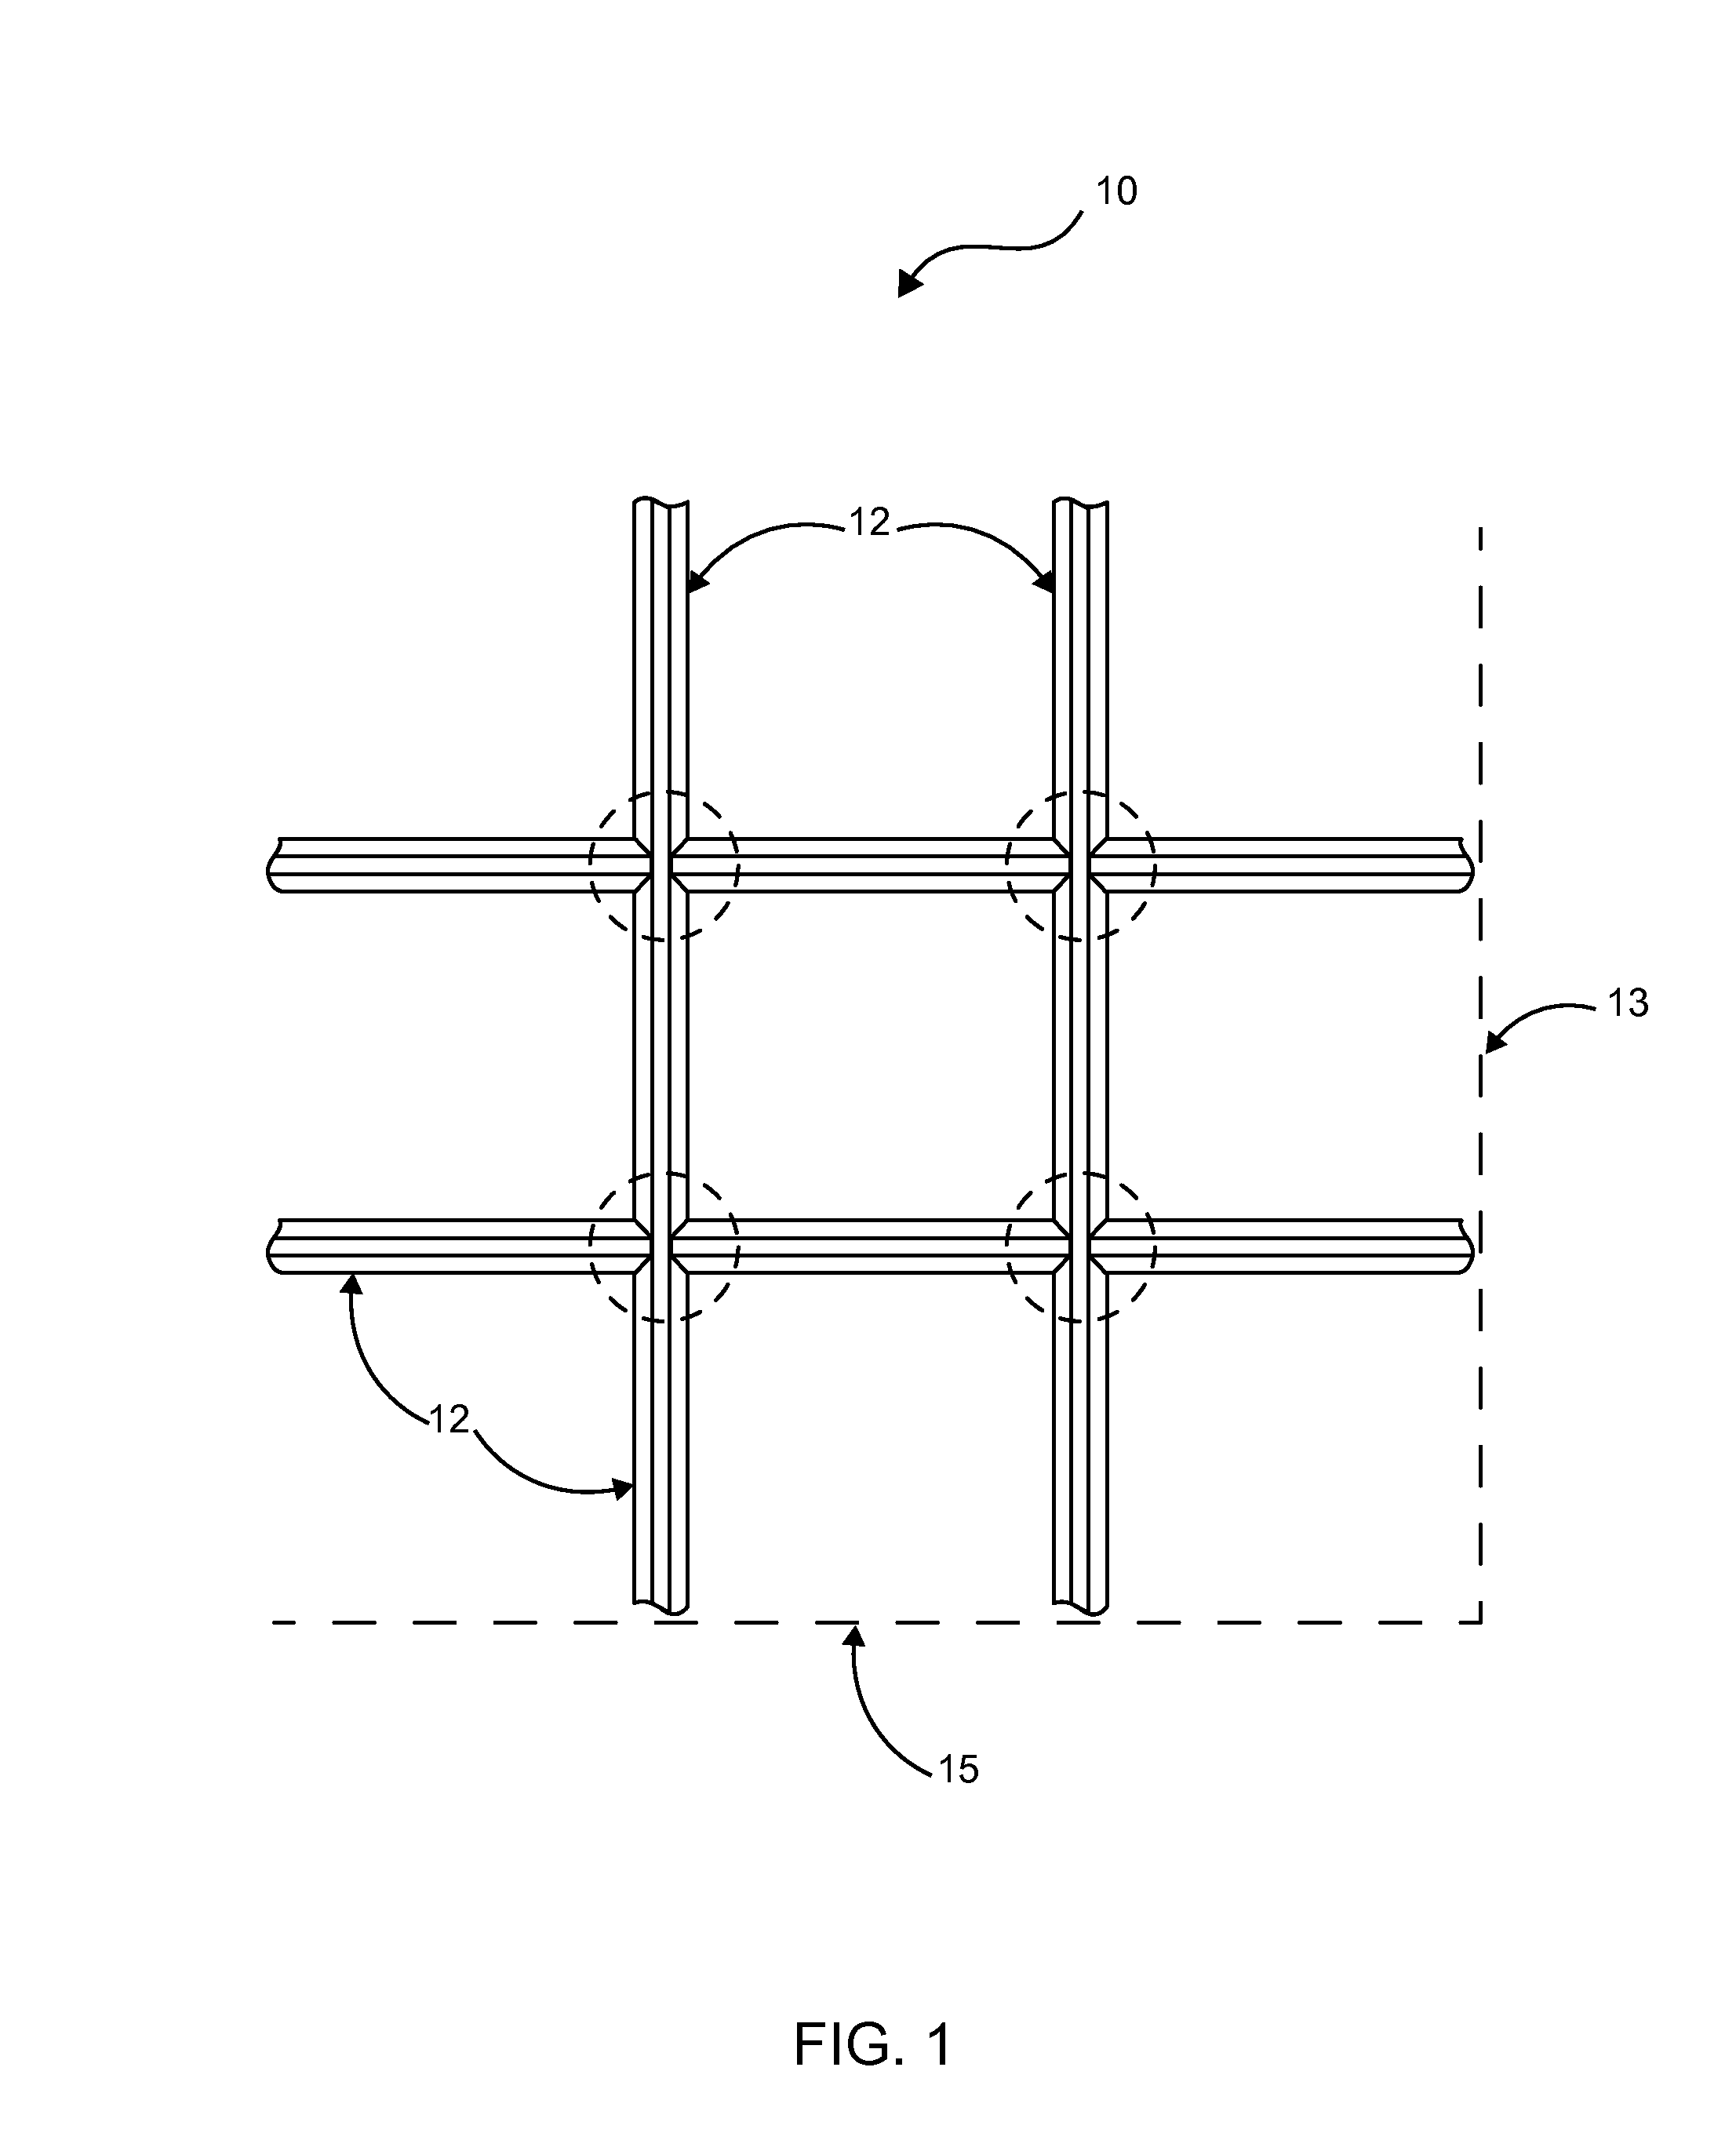 Method and Apparatus For Assembling Simulated Divided Light Window Grids.